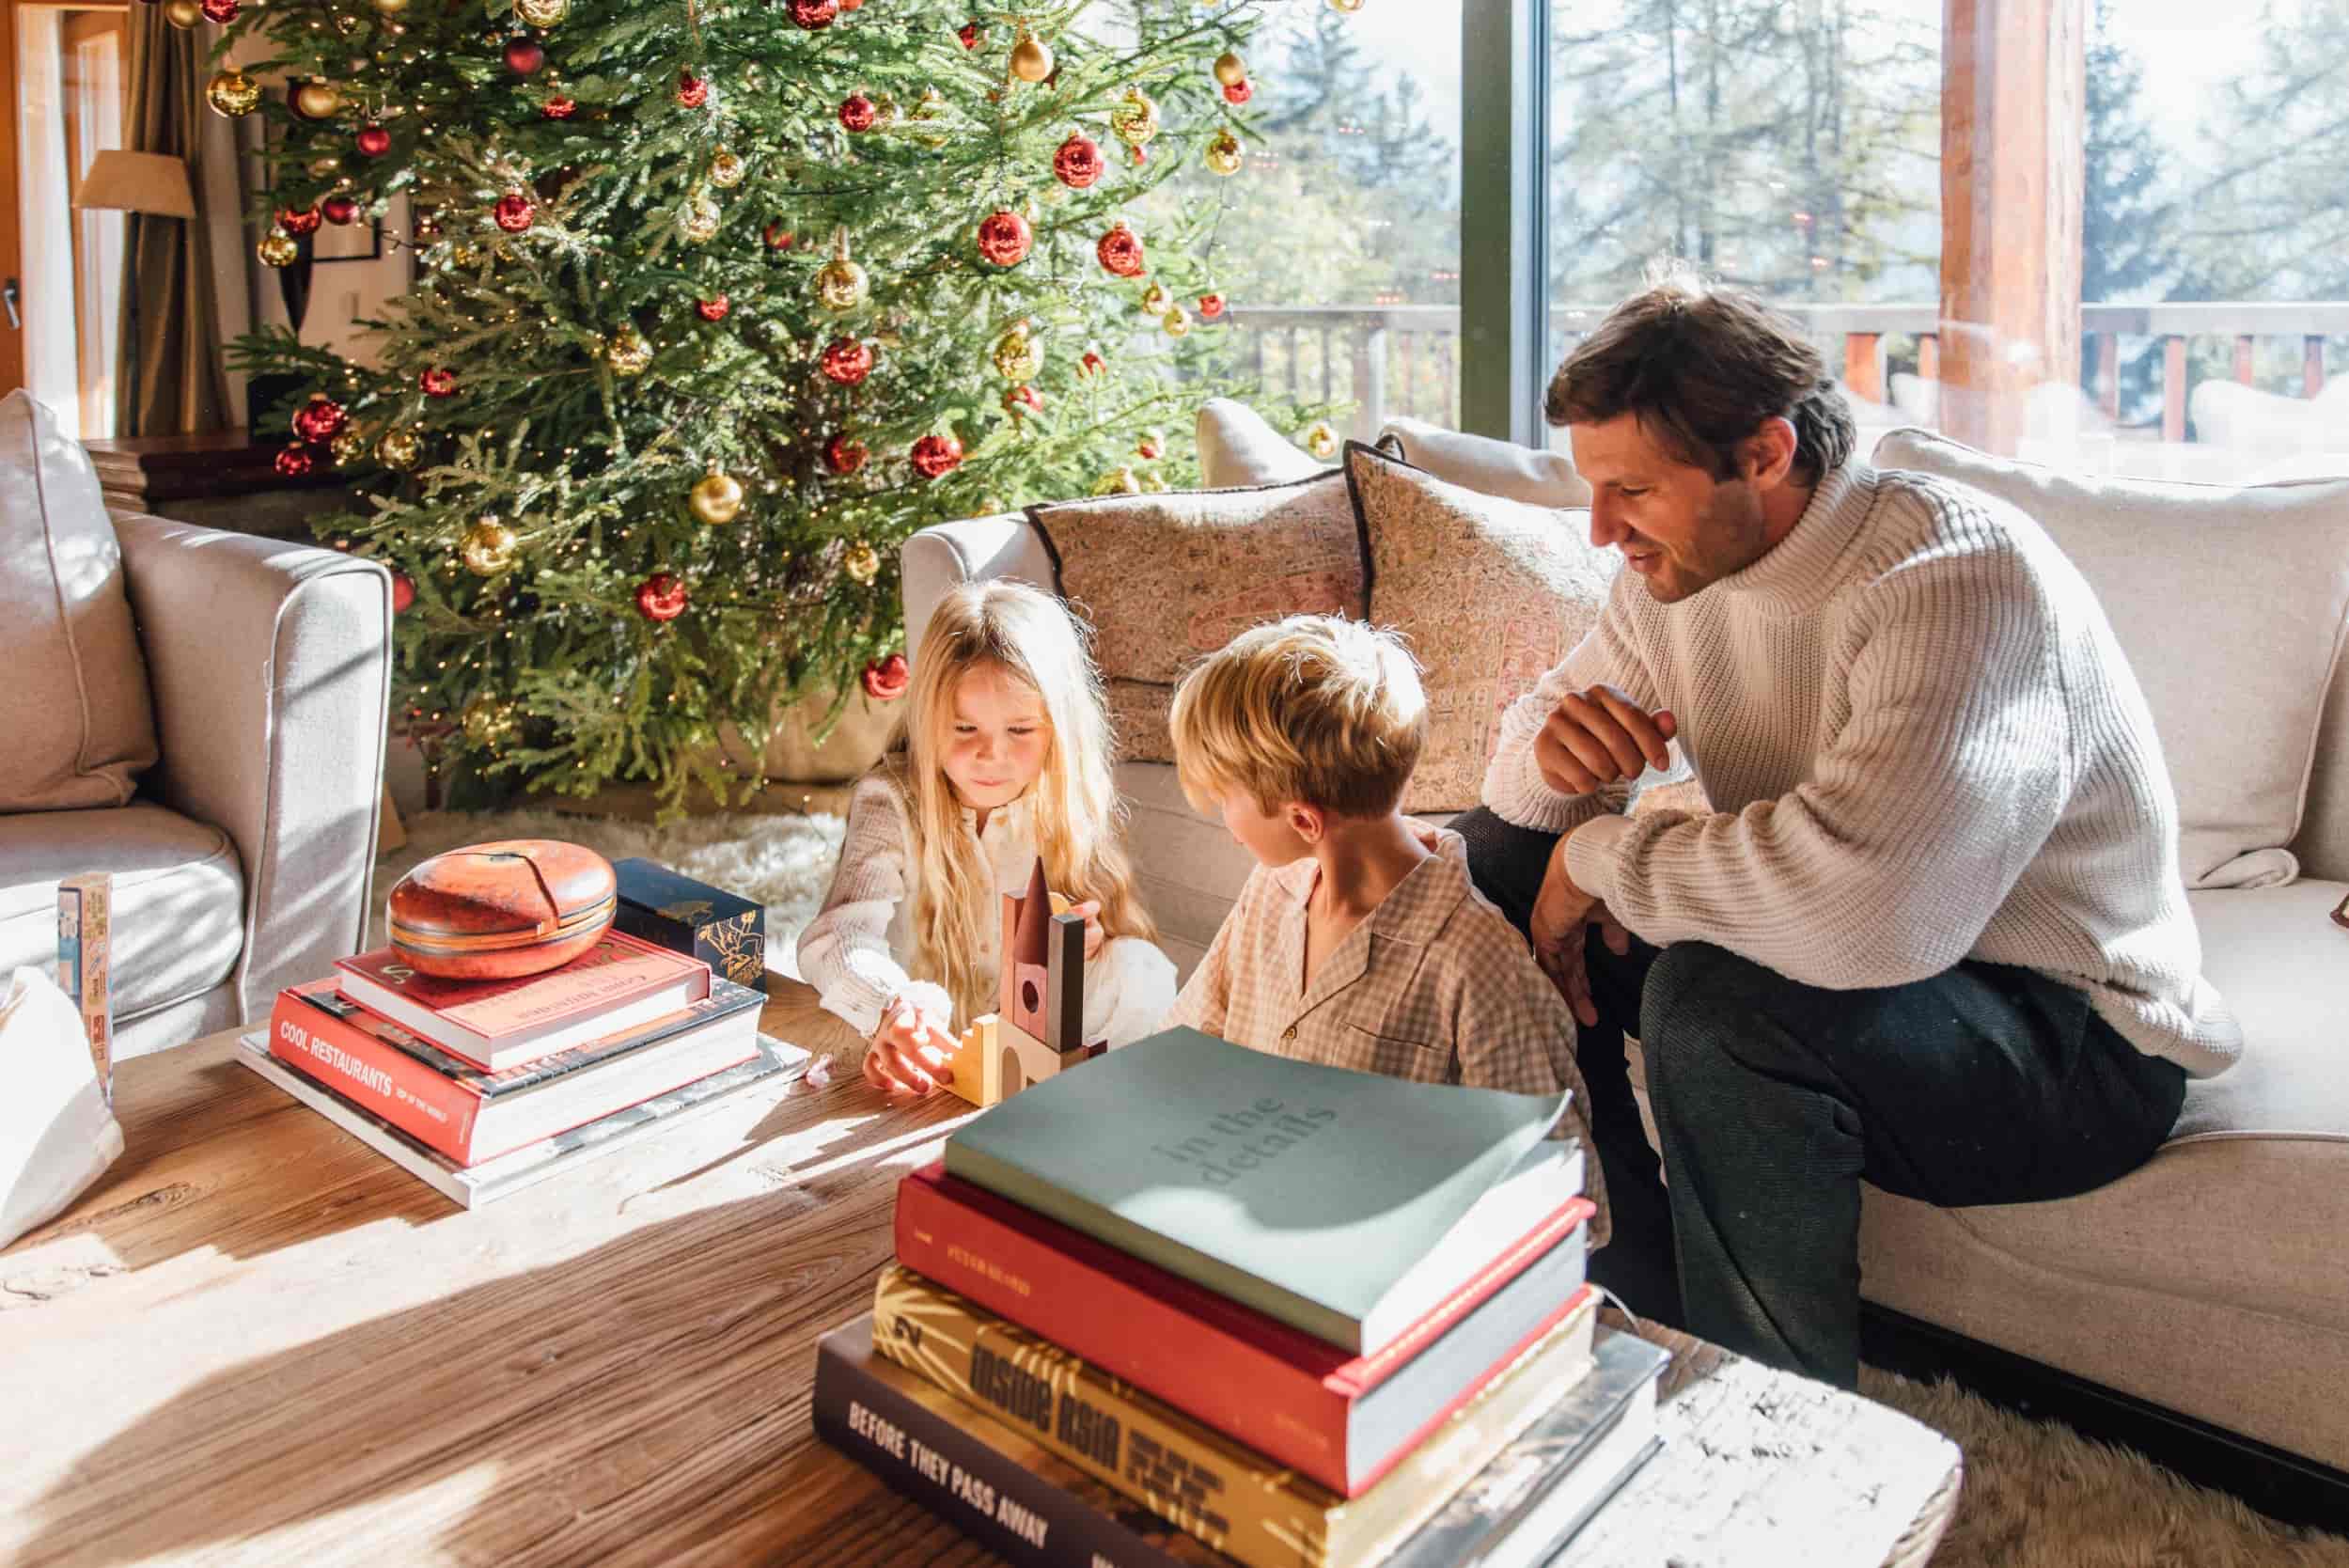 A-father-sad-on-a-coach-next-to-a-decorated-christmas-tree-watching-his-blond-son-and-daughter-play-with-wooden-toys-on-a table-covered-in-books